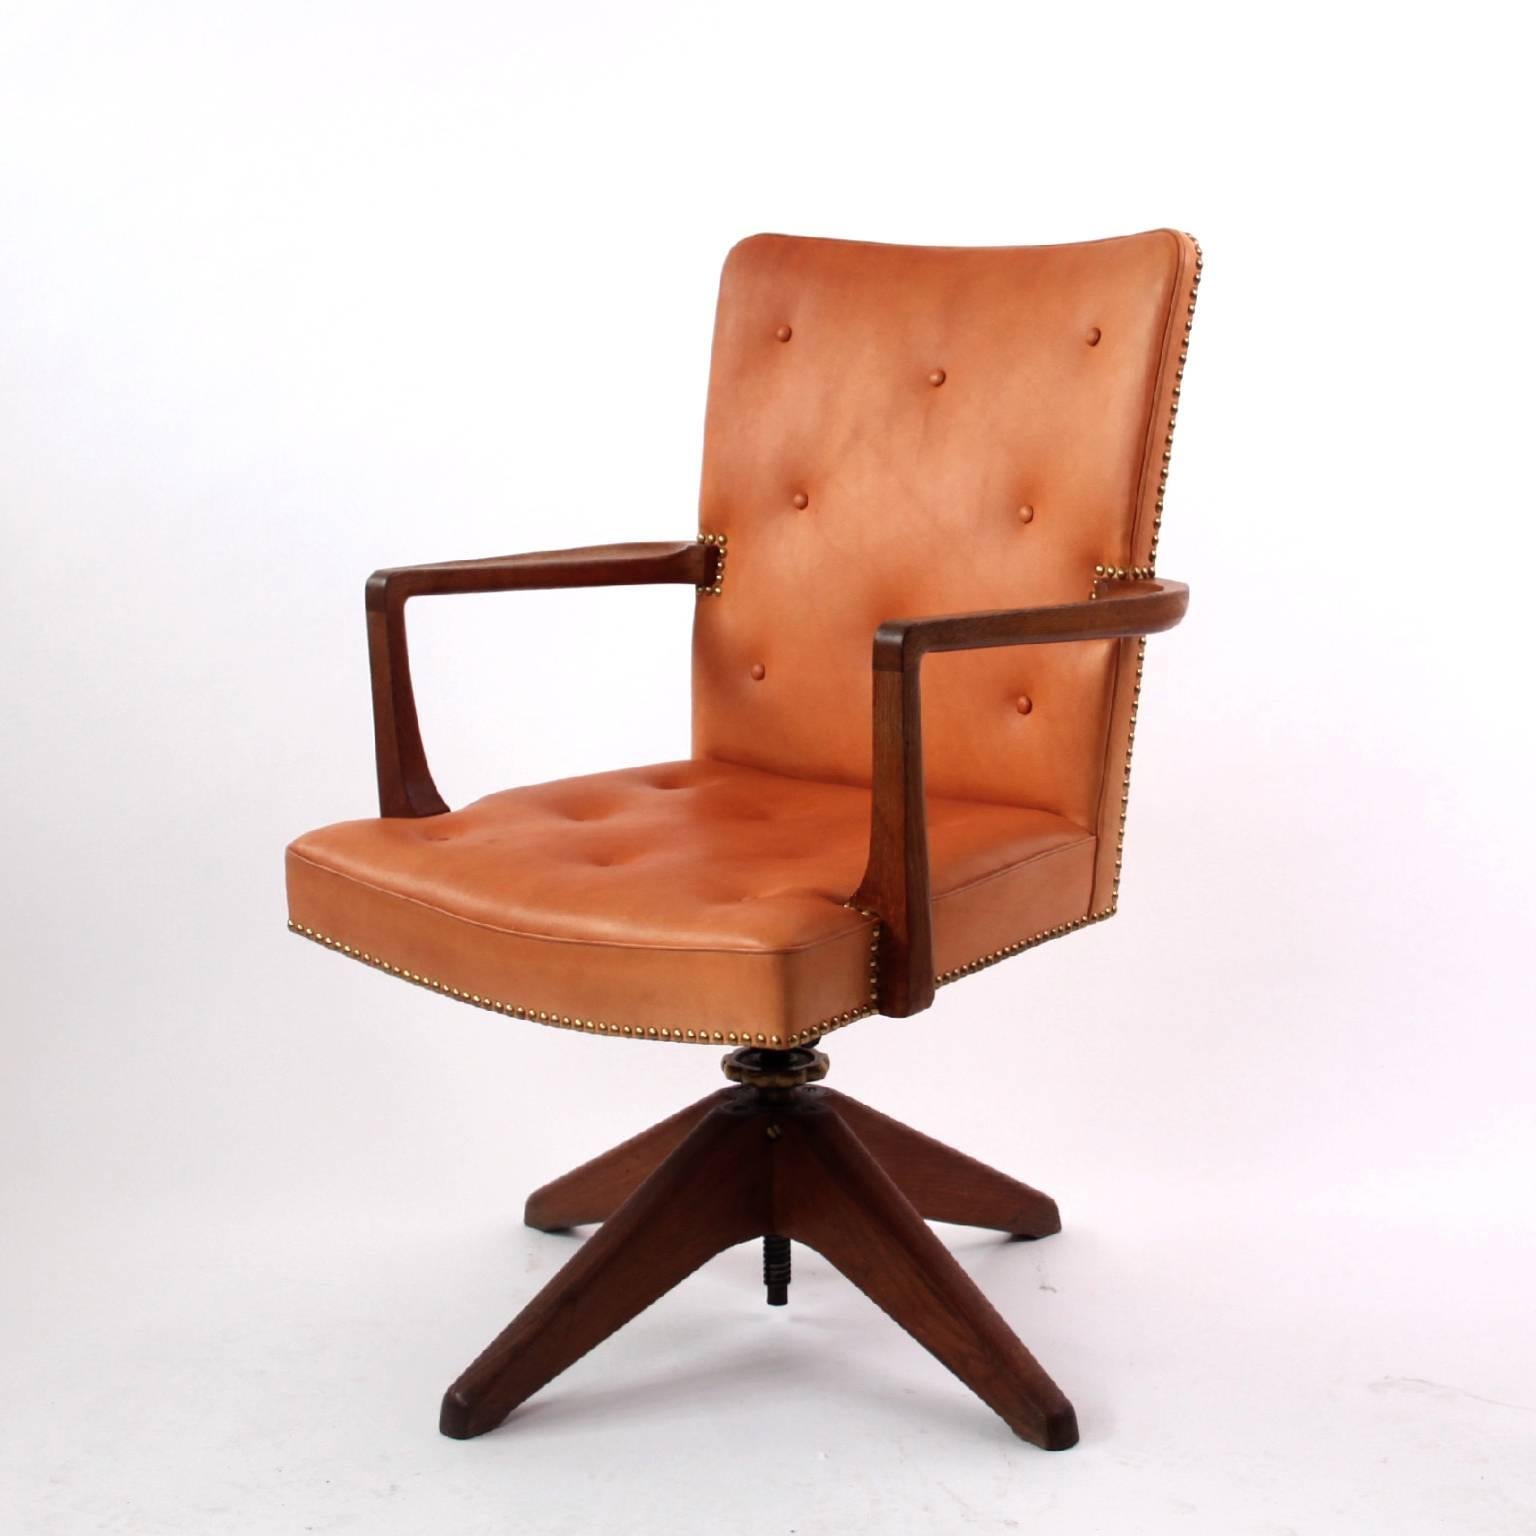 Palle Suenson & Jacob Kjær - Scandinavian Modern

A rare executive desk chair by Danish Modenist Architect Palle Suenson (1904-1987) and cabinetmaker Jacob Kjær (1896-1957) a special order for the executive offices in Burmeister & Wain in